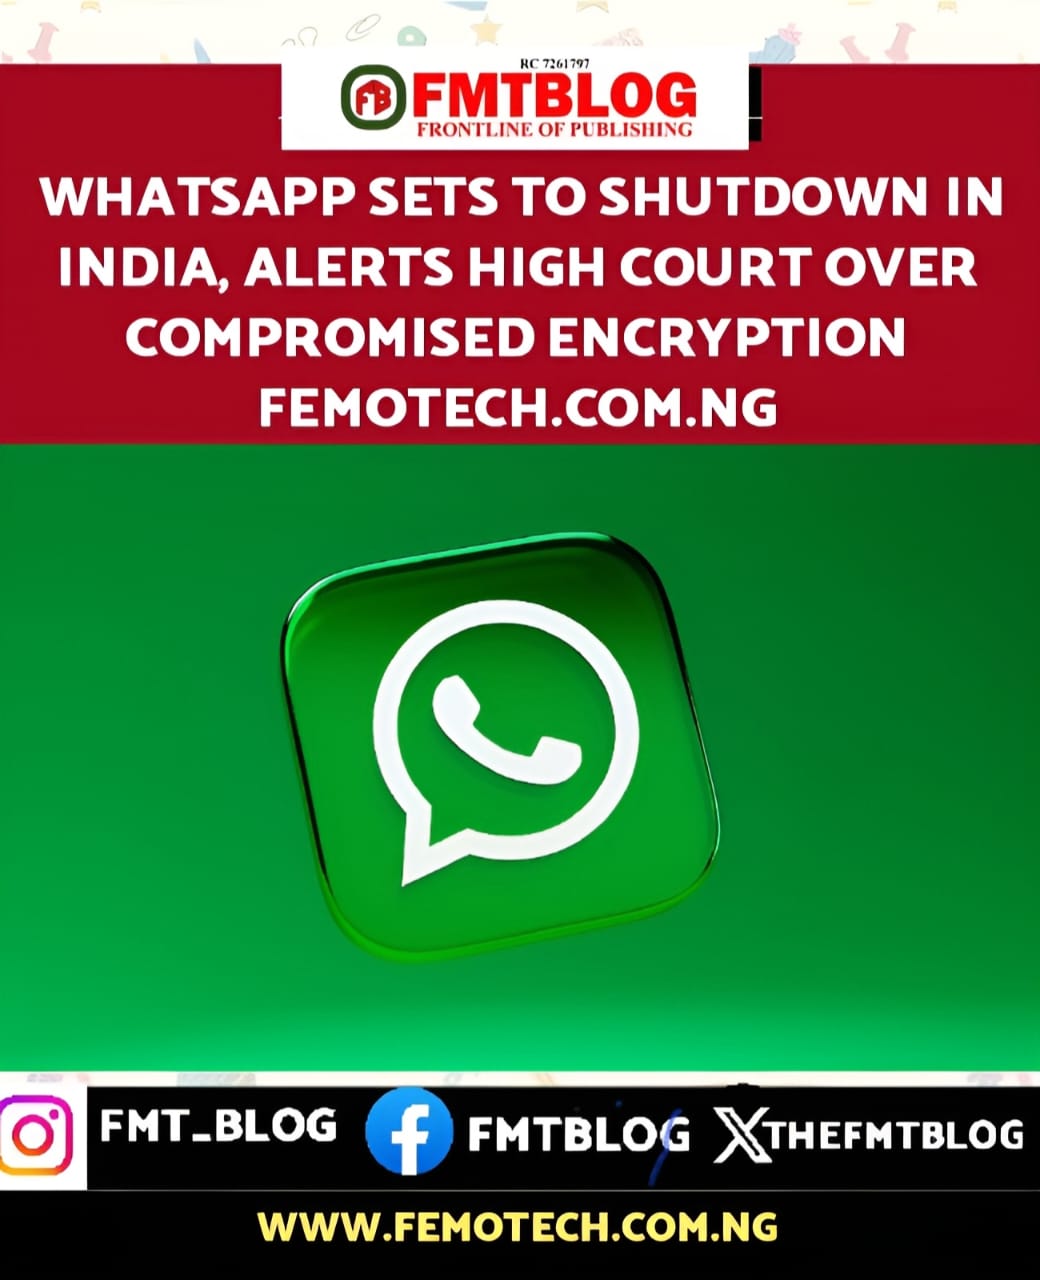 WhatsApp Sets To Shutdown In India, Alerts Delhi High Court Over Comprised Encryption